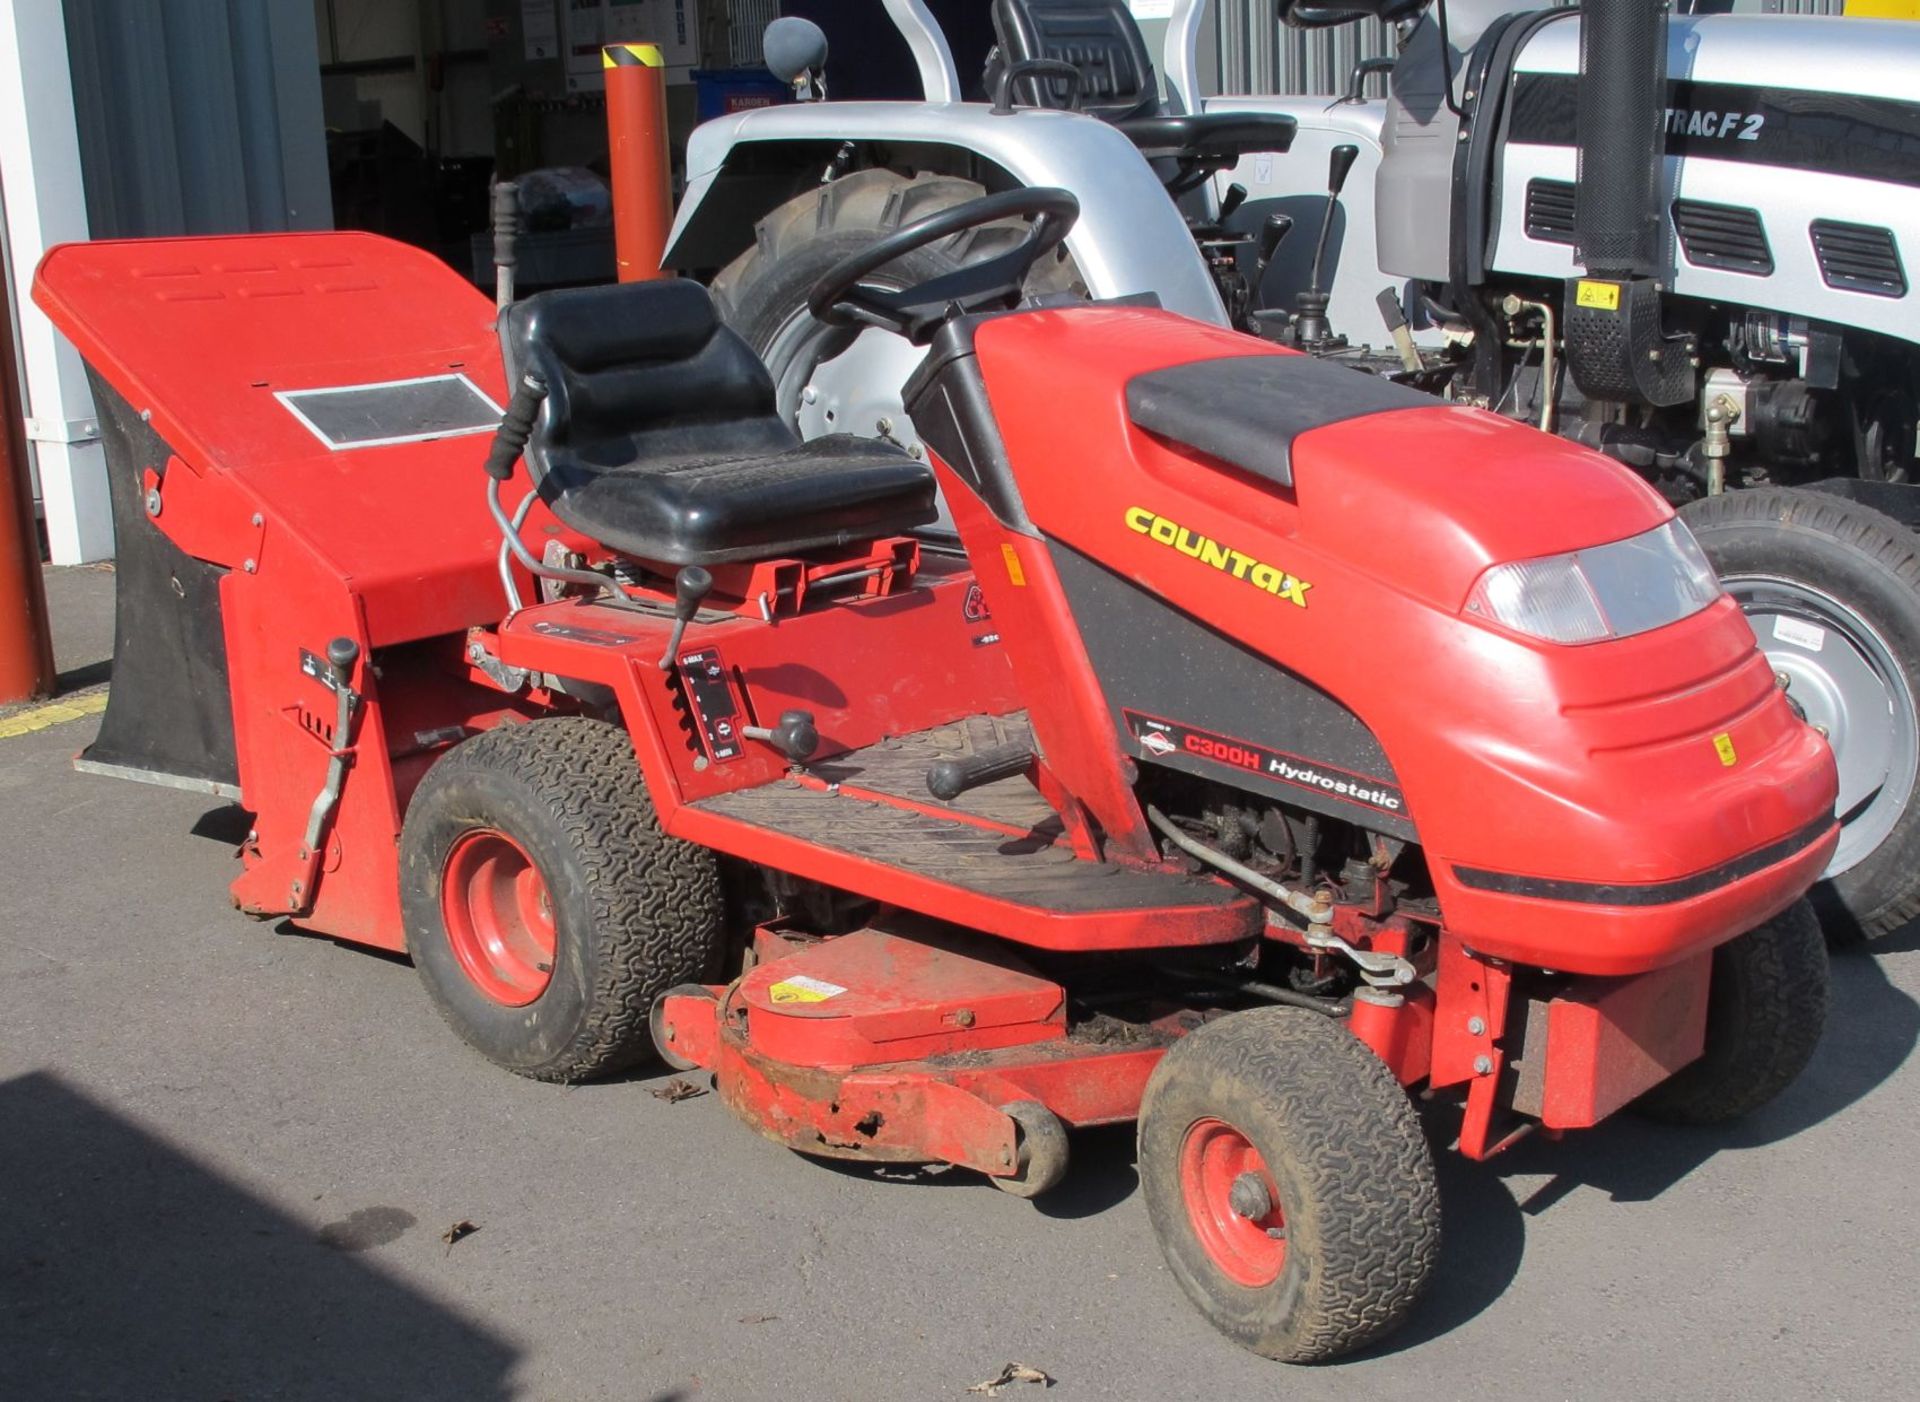 * Contax C300H Hydrostatic Ride on Mower (starts but doesn't drive) c/w brand new battery